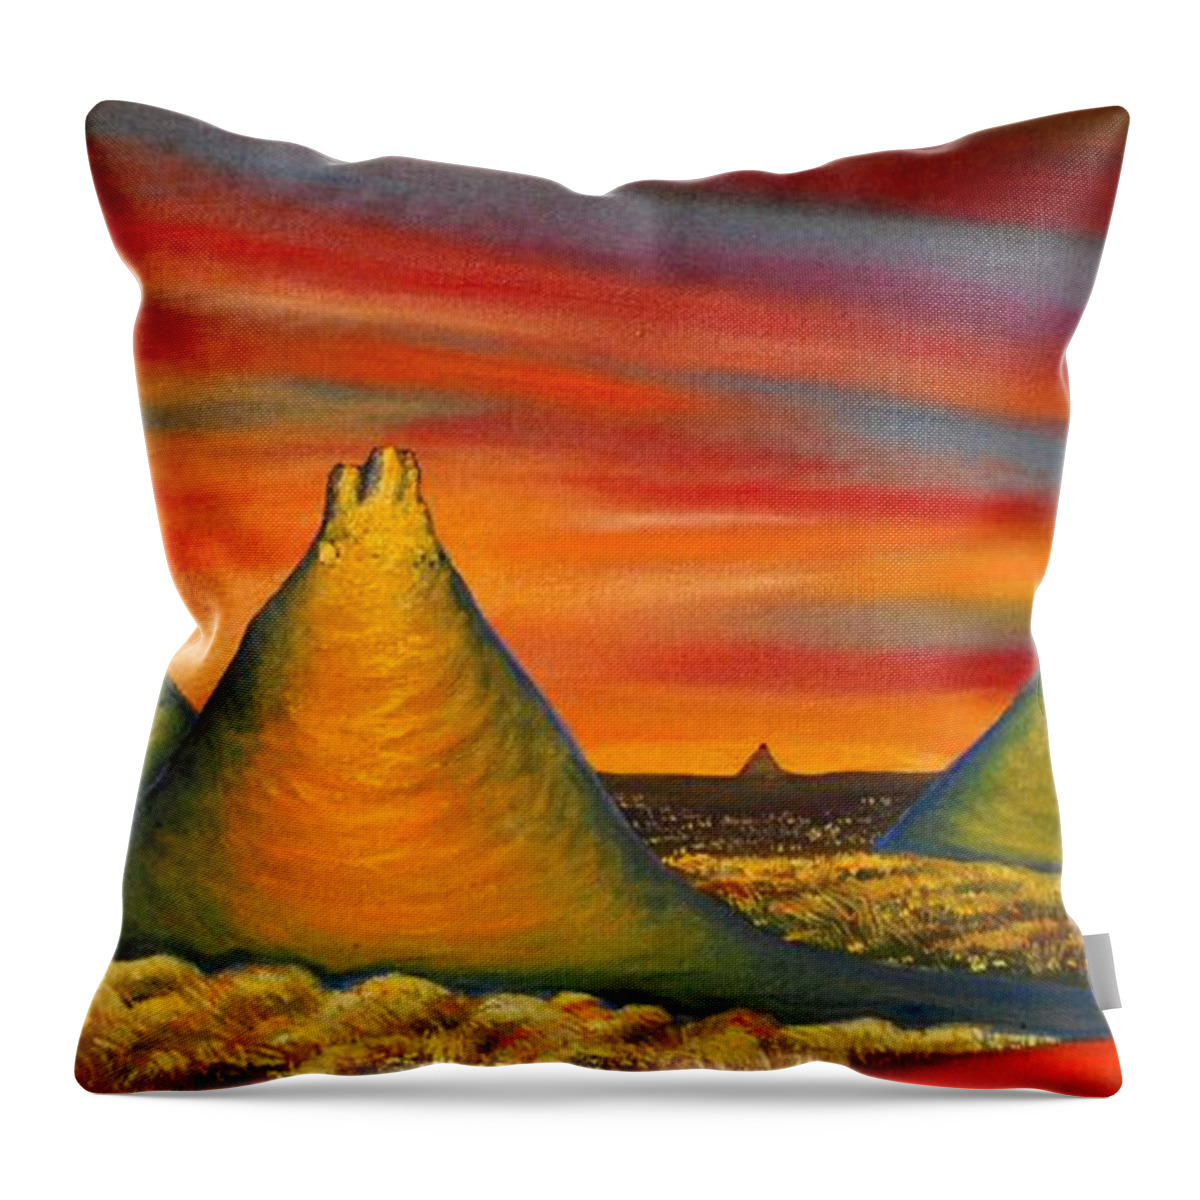 Red Throw Pillow featuring the painting Sunset #1 by Franci Hepburn